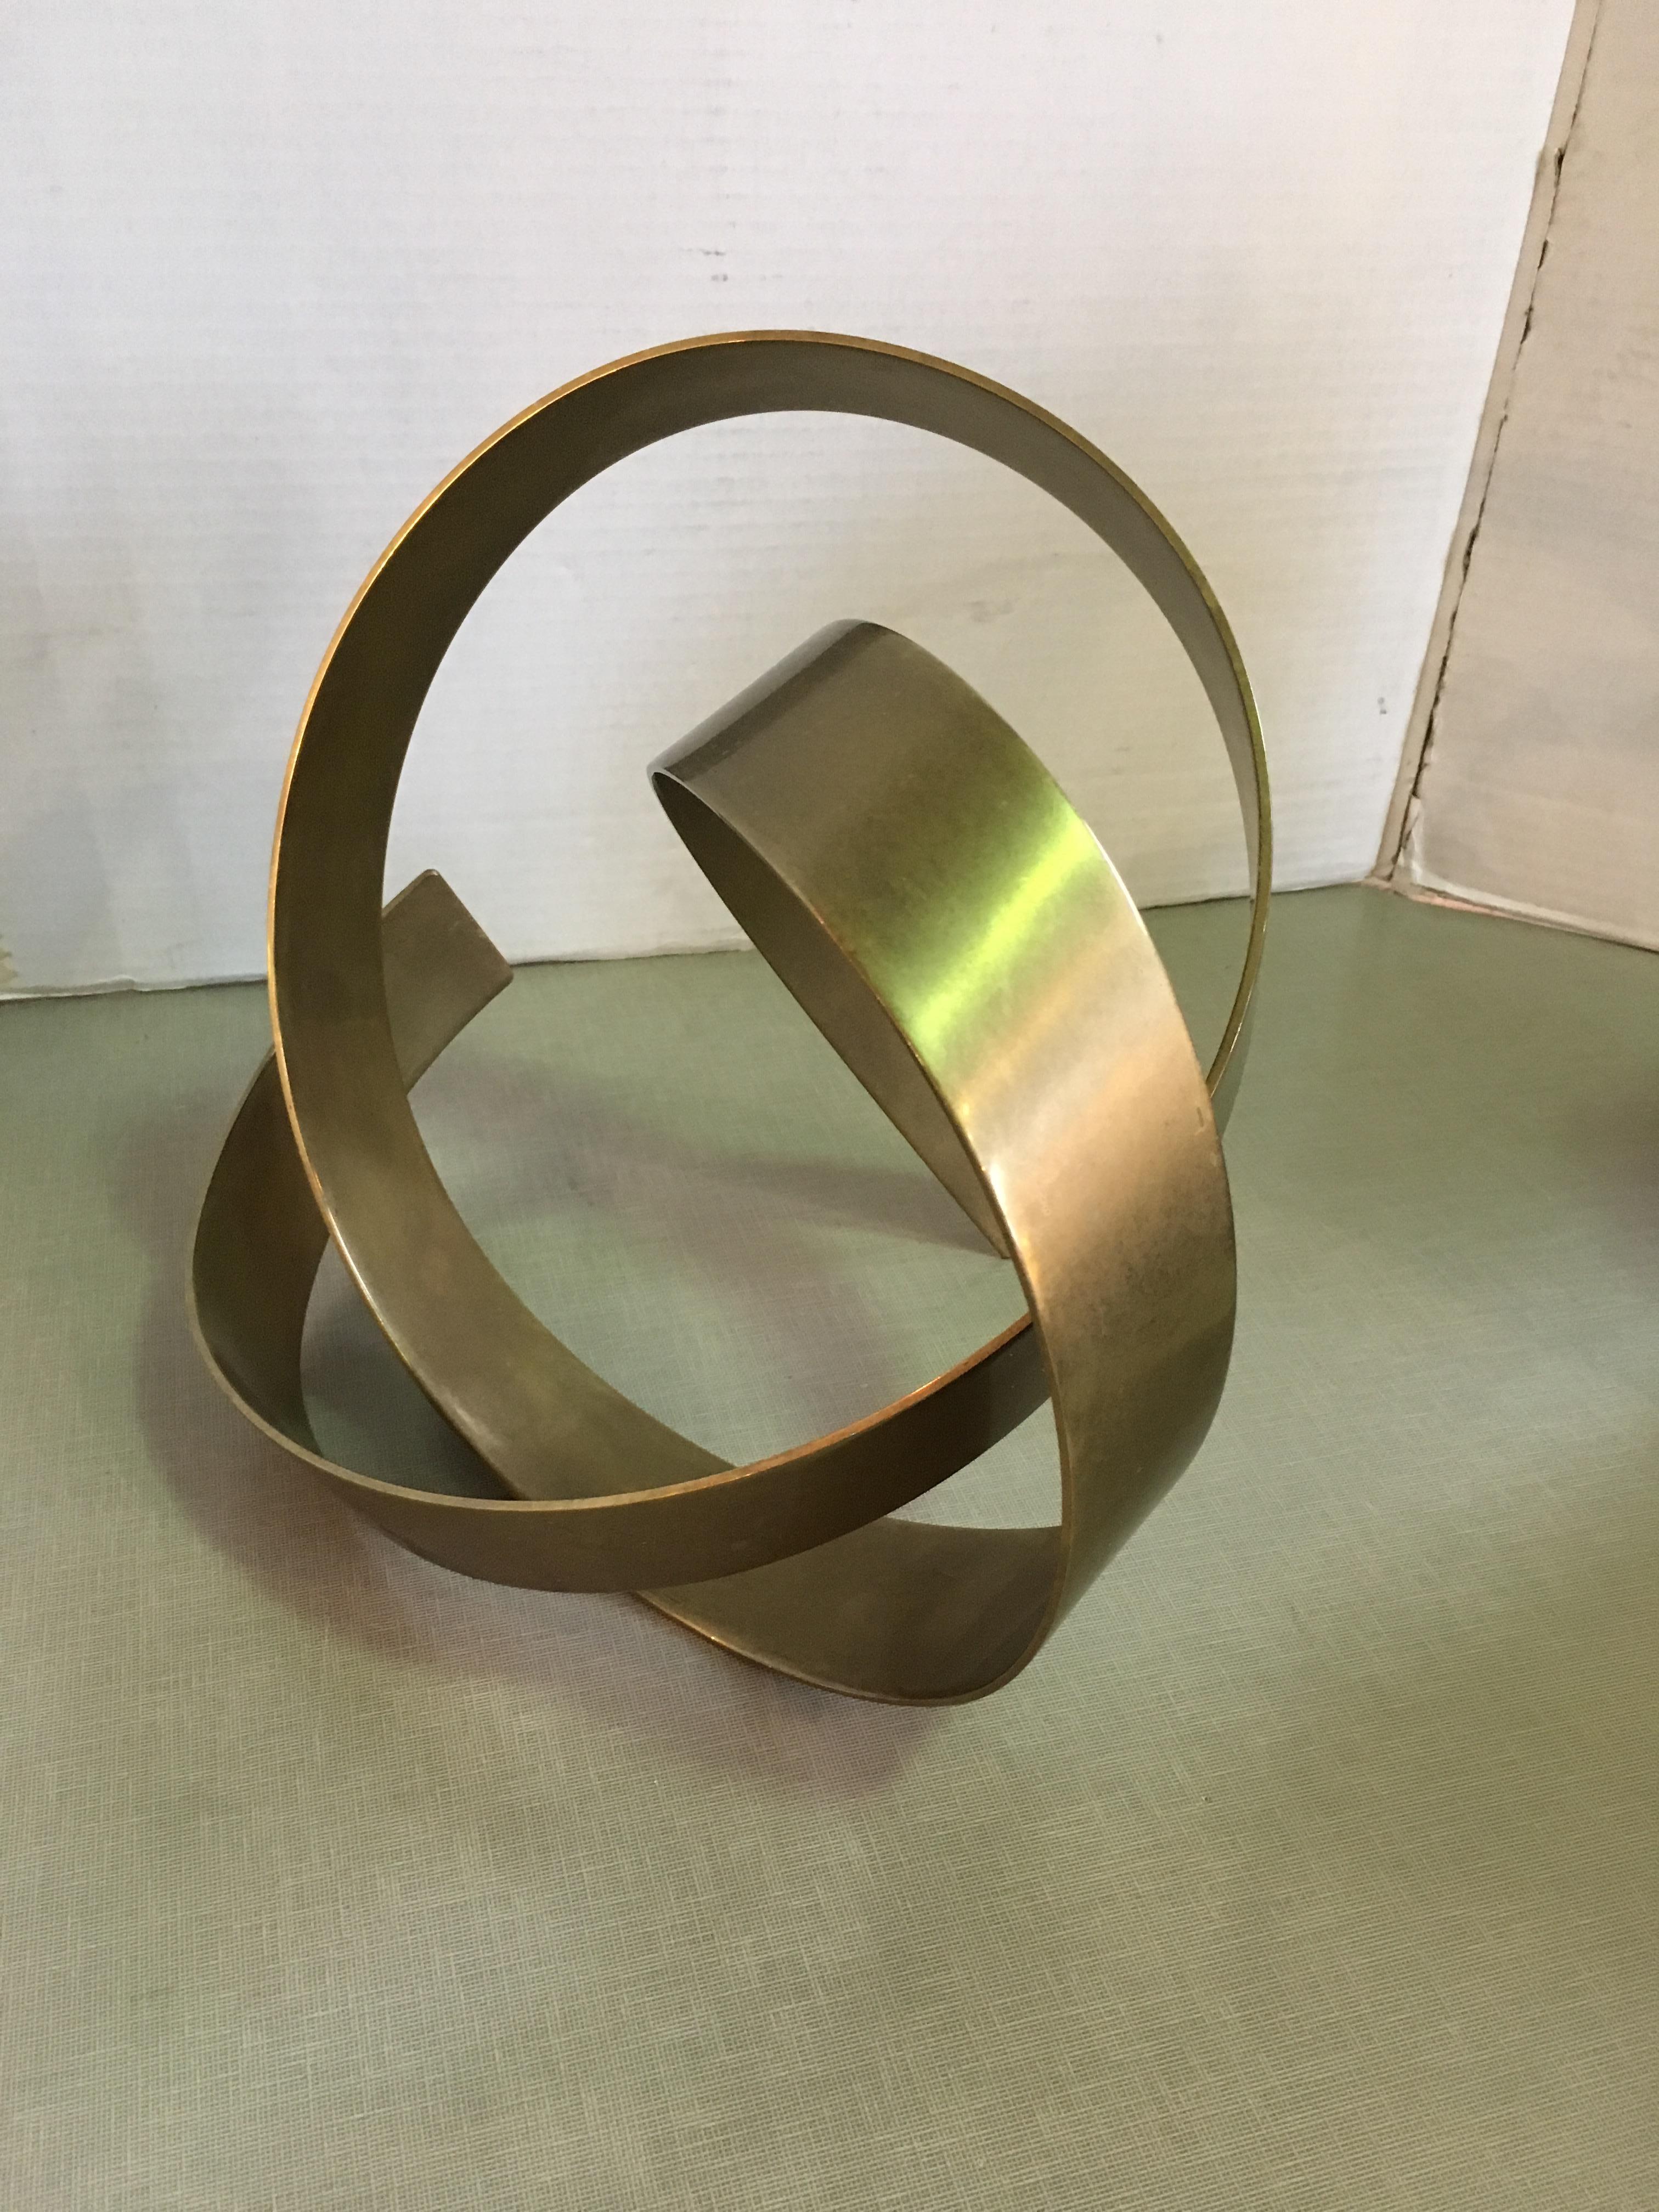 This is a heavy brass abstract sculpture signed and dated by James W. Uhrig.